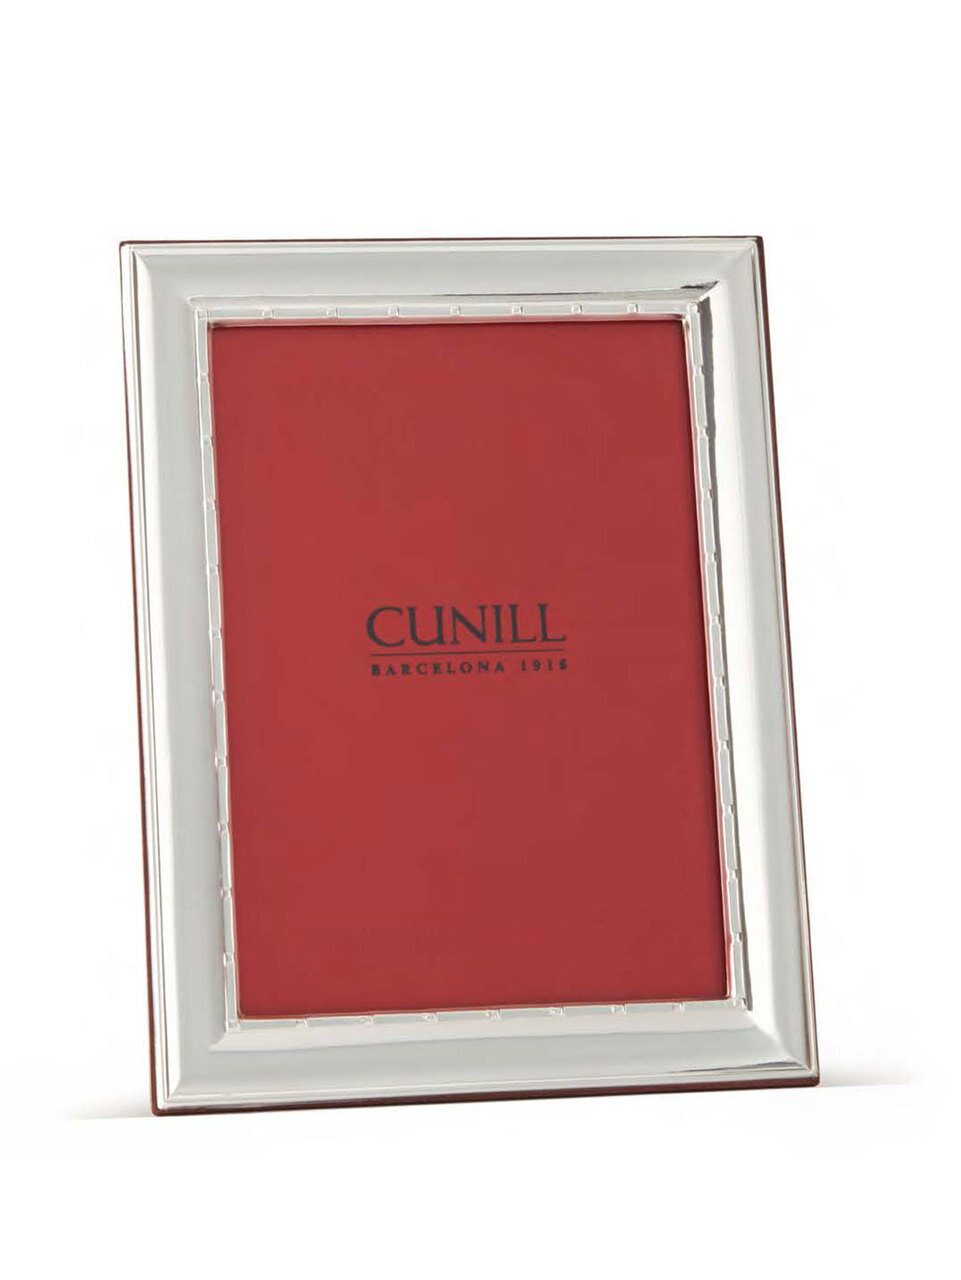 Cunill 5000 4 x 6 Inch Picture Frame - Sterling Silver